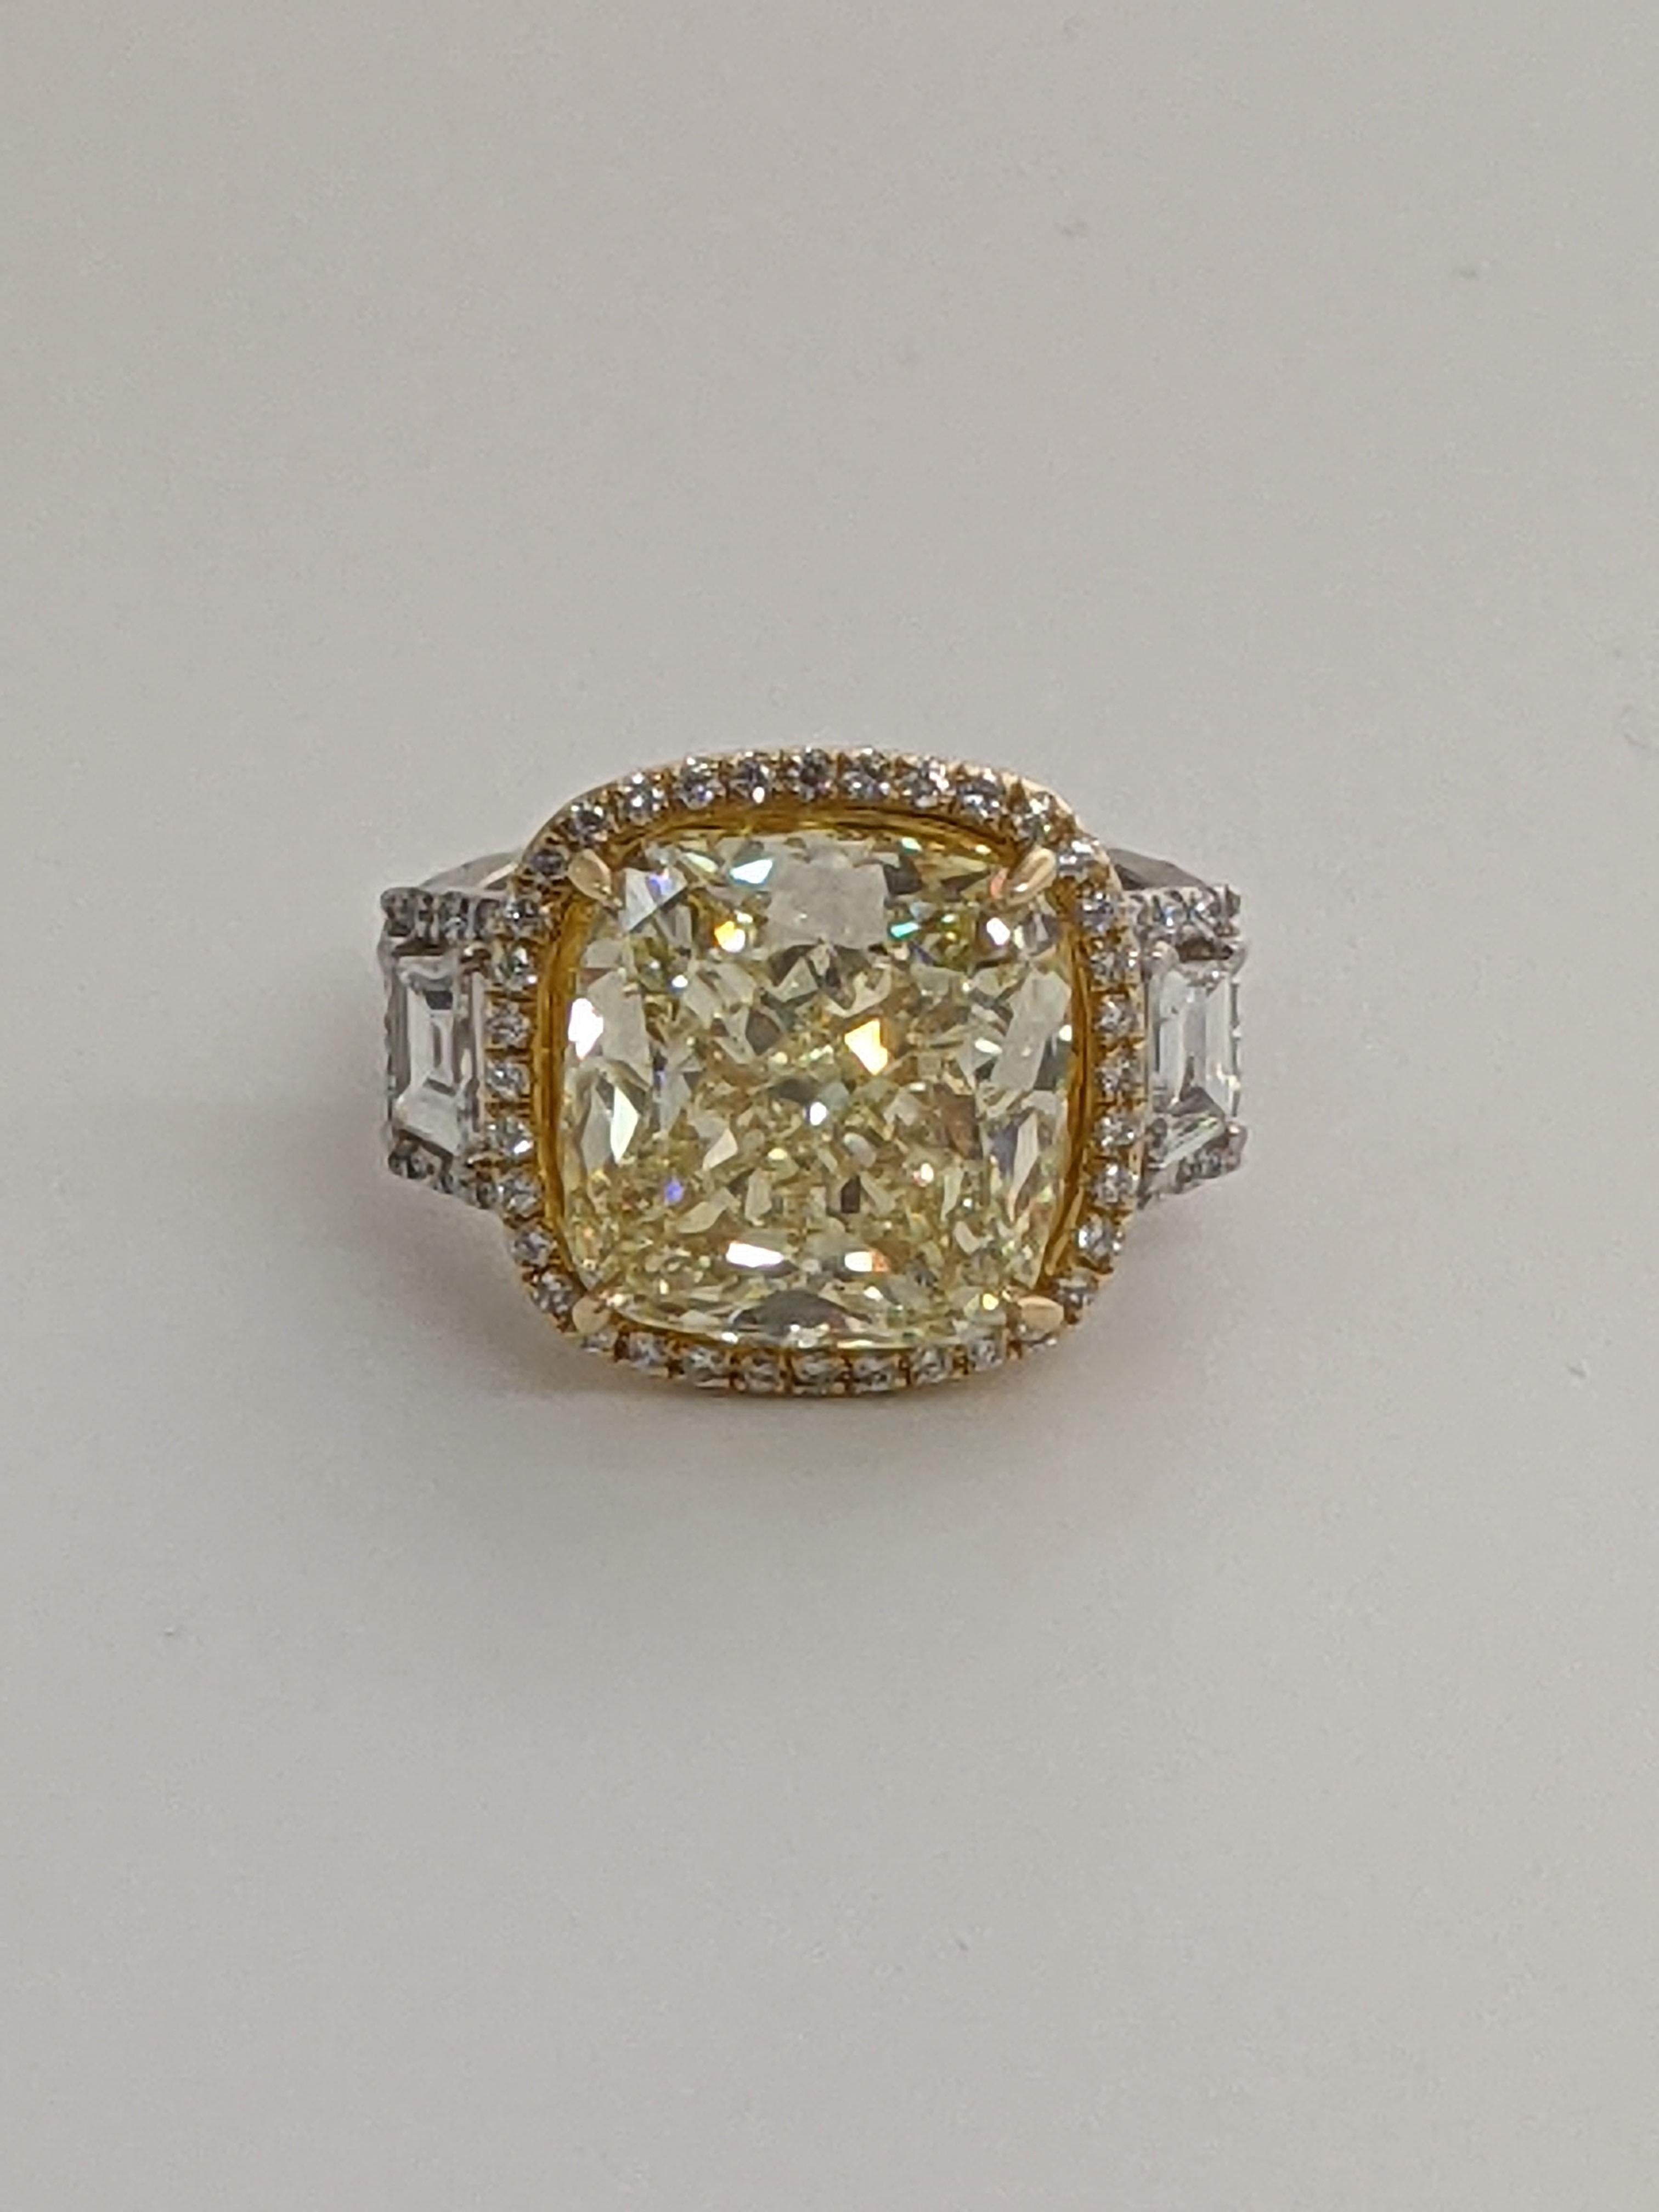 This gorgeous, statement making ring features a 10.20 Fancy Light Yellow cushion cut diamond of VS1 clarity as detailed with the GIA report.   On each side of the diamond are step cut white diamonds with a halo of smaller white diamonds.  GIA Report